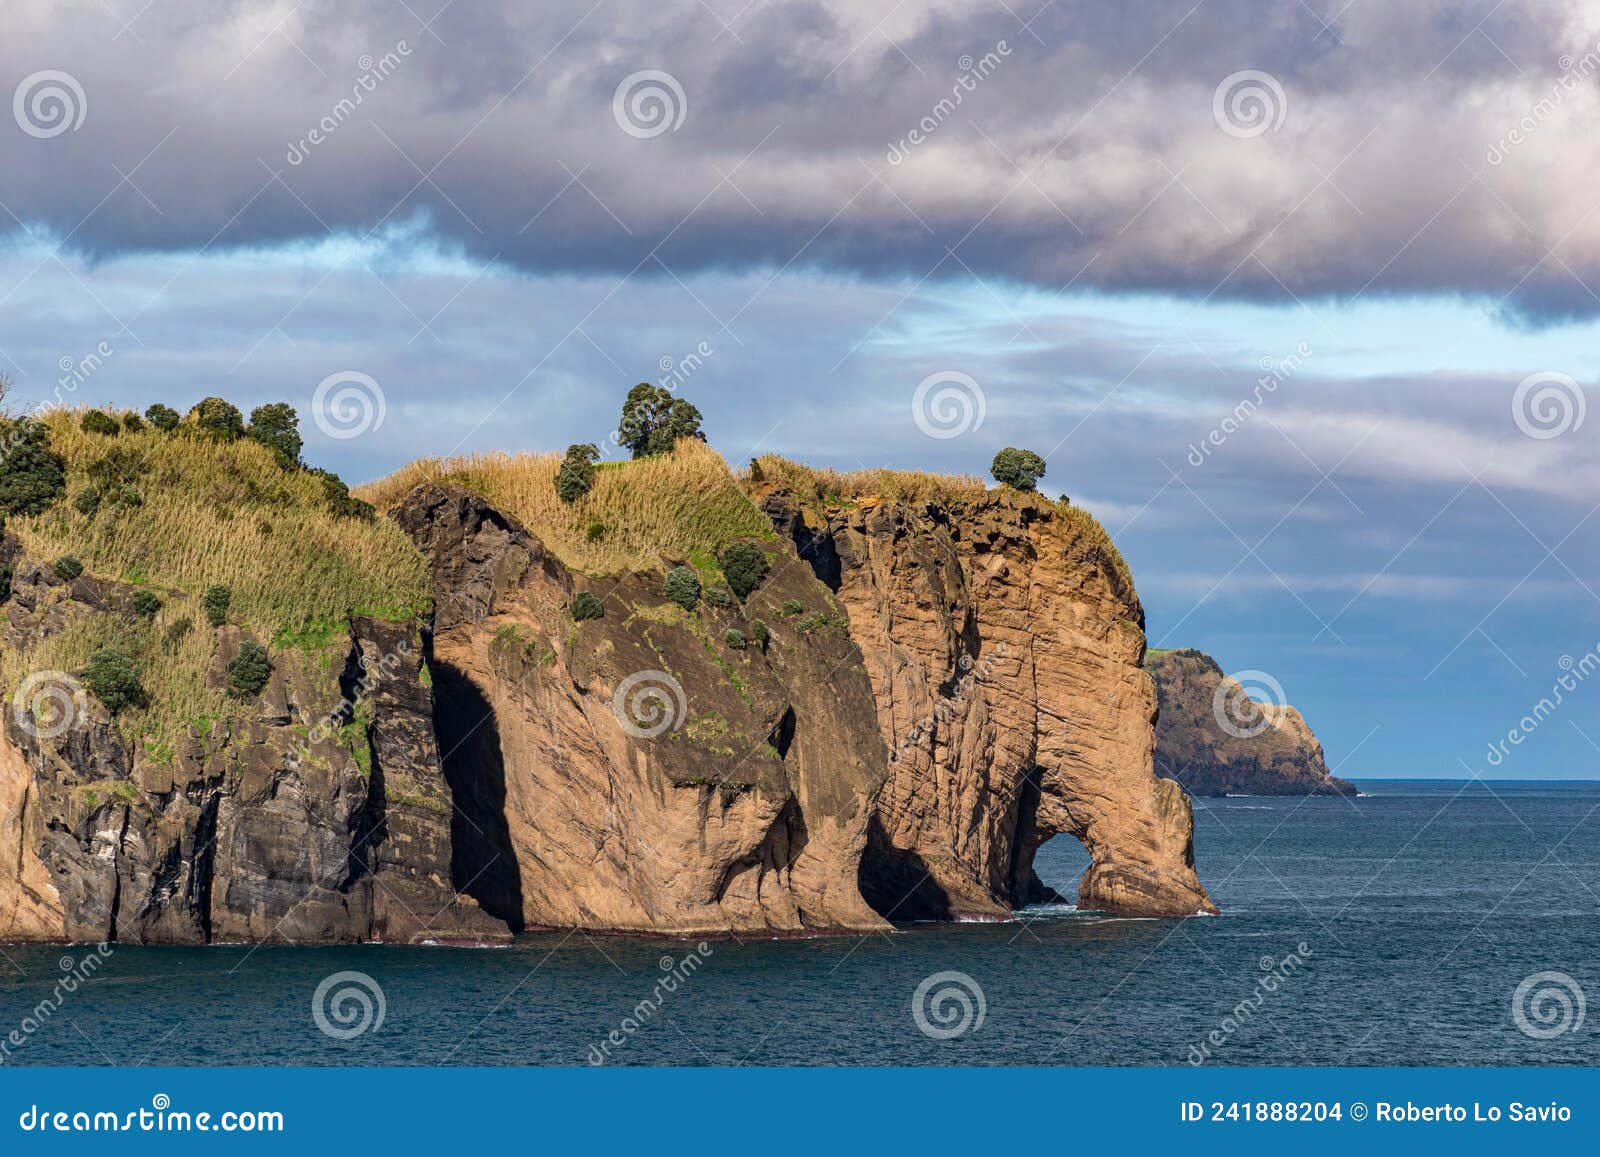 rocky coastline in sao miguel island with characteristic rock formation called tromba do elefante azores, portugal